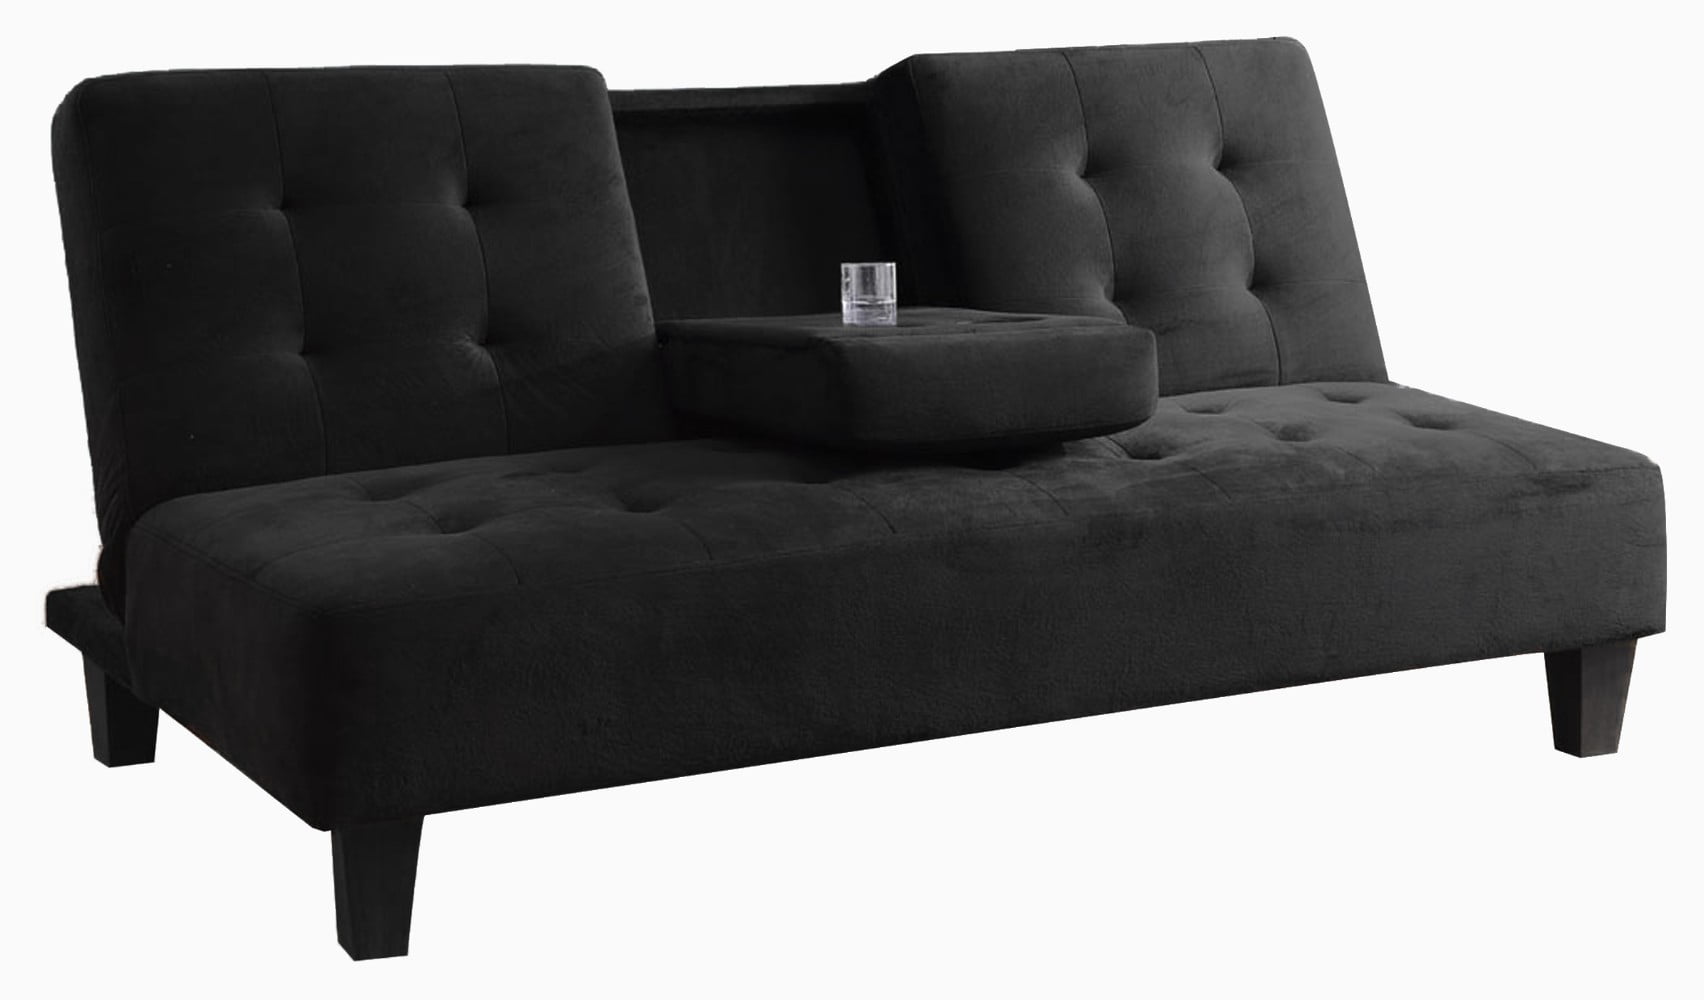 porter fabric tufted sofa bed at walmart